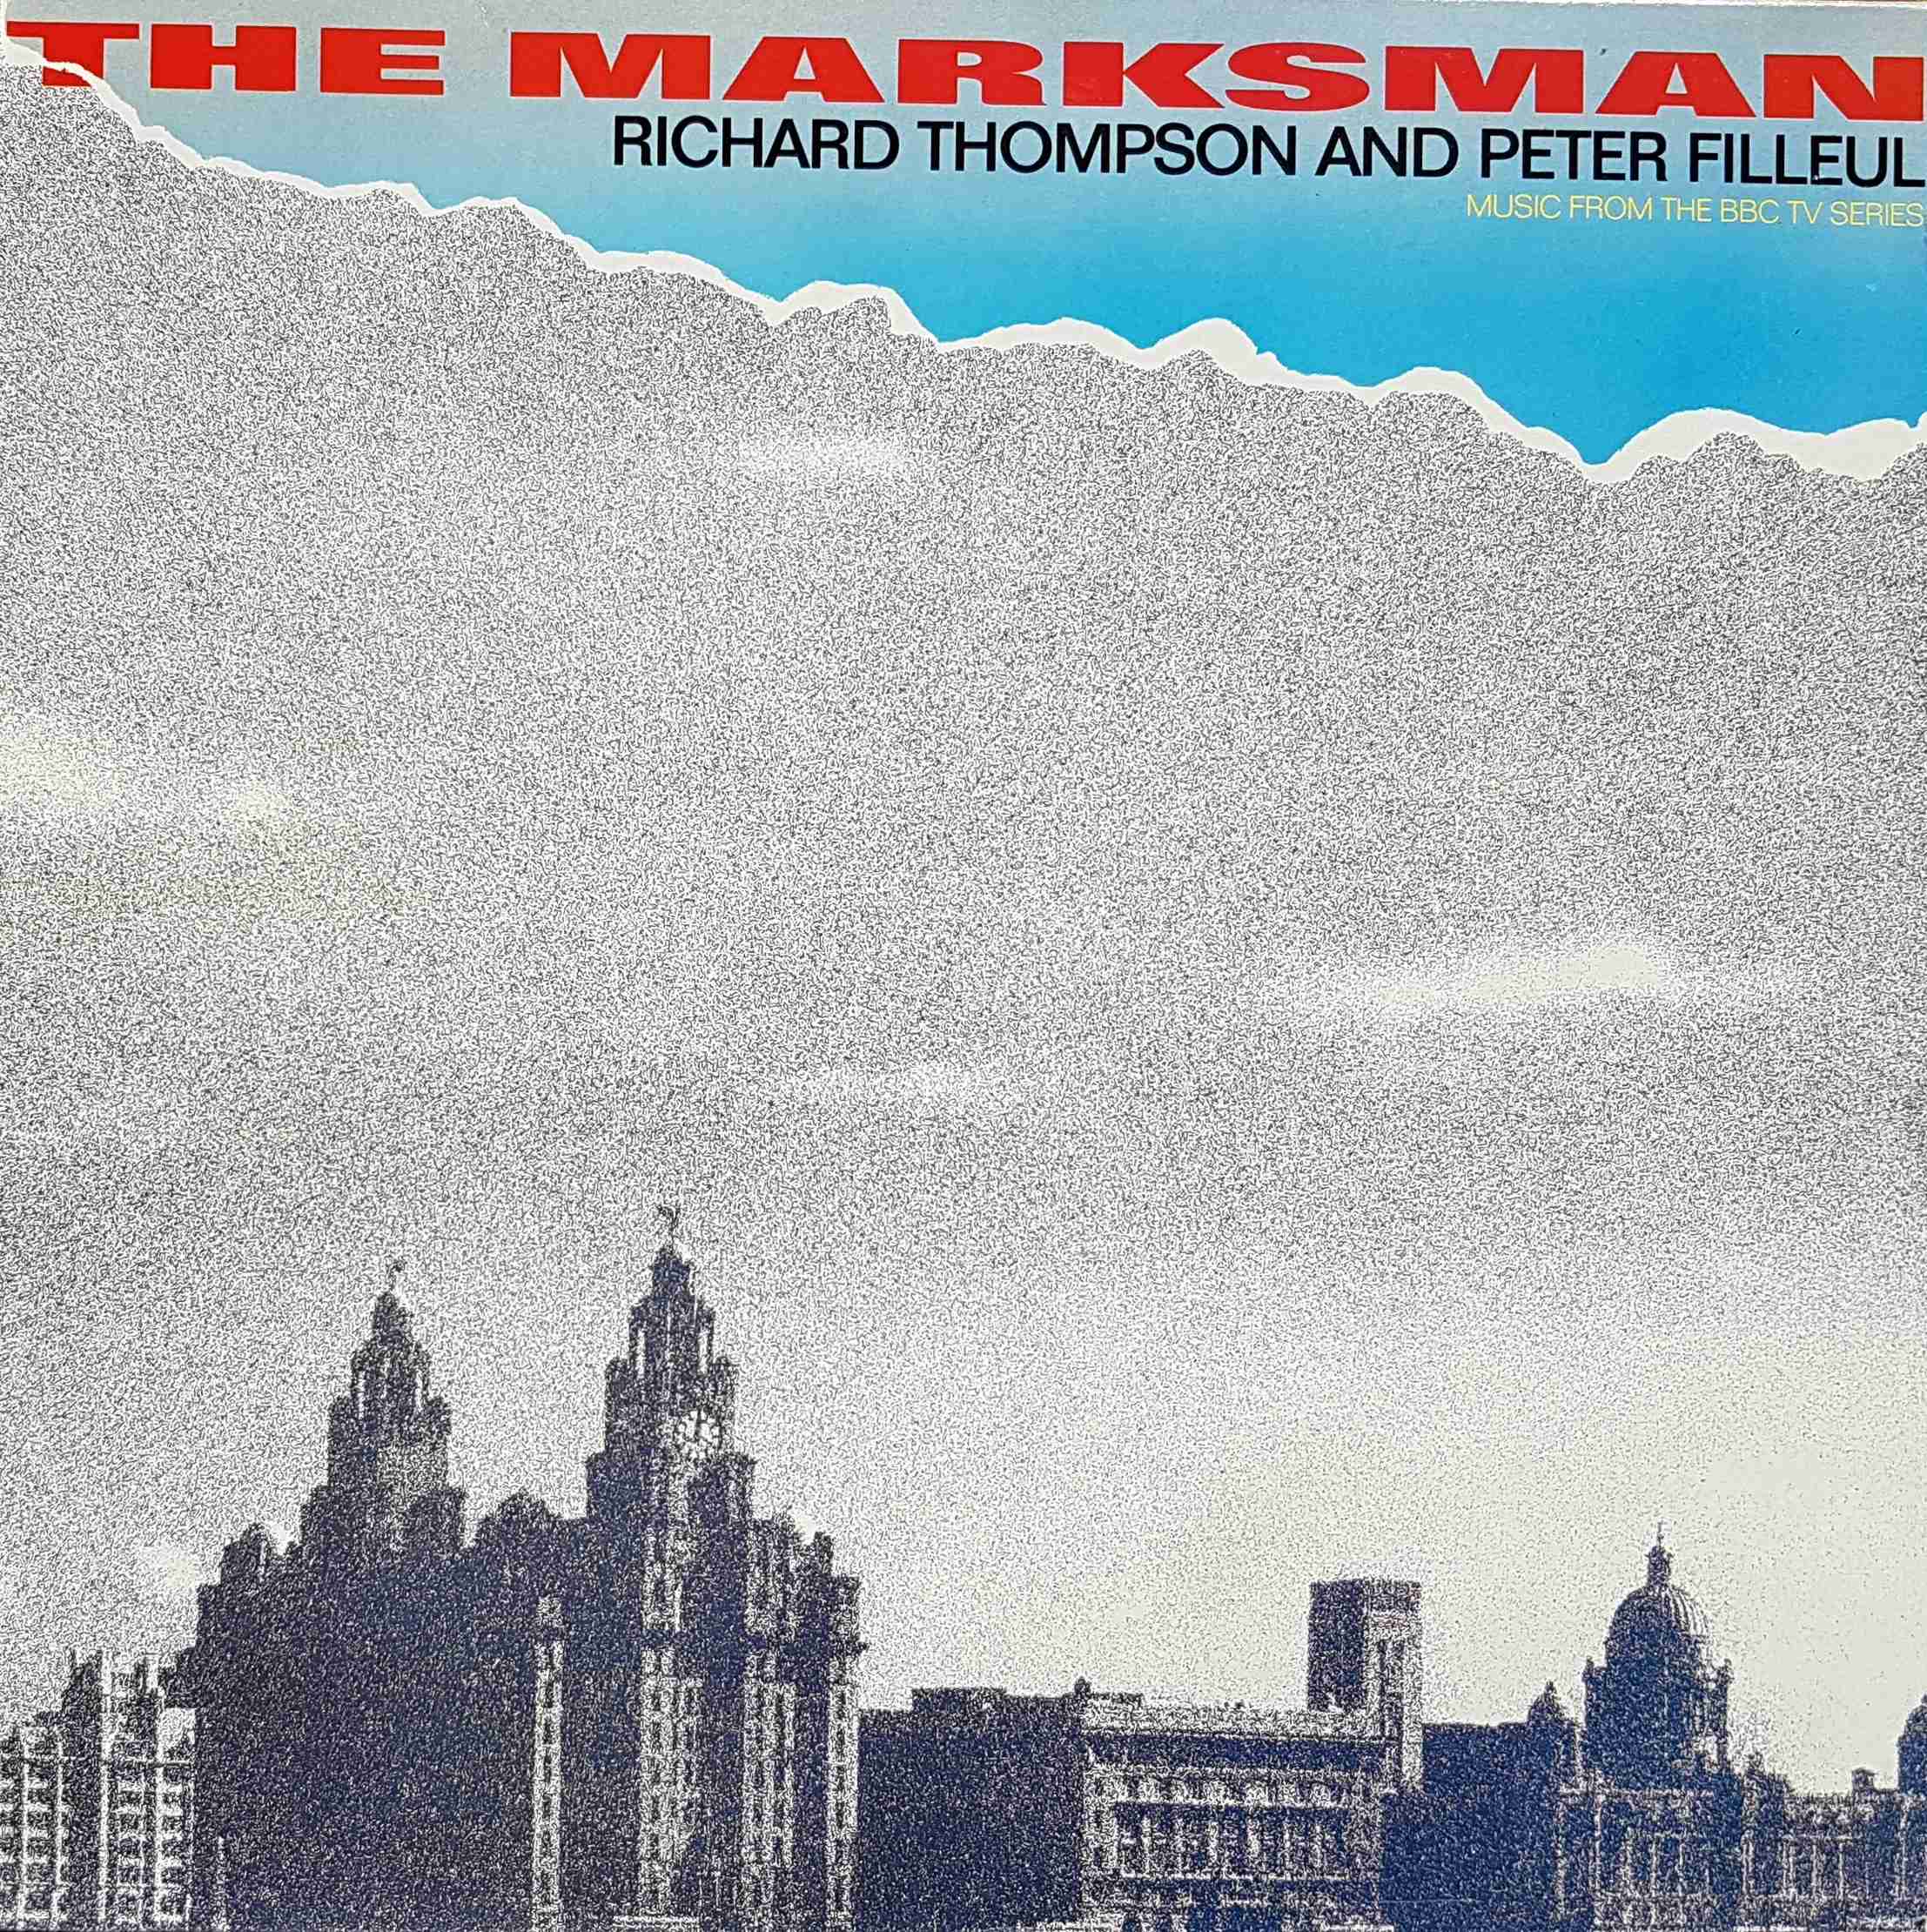 Picture of REB 660 The marksman by artist Richard Thompson / Peter Filleul from the BBC albums - Records and Tapes library